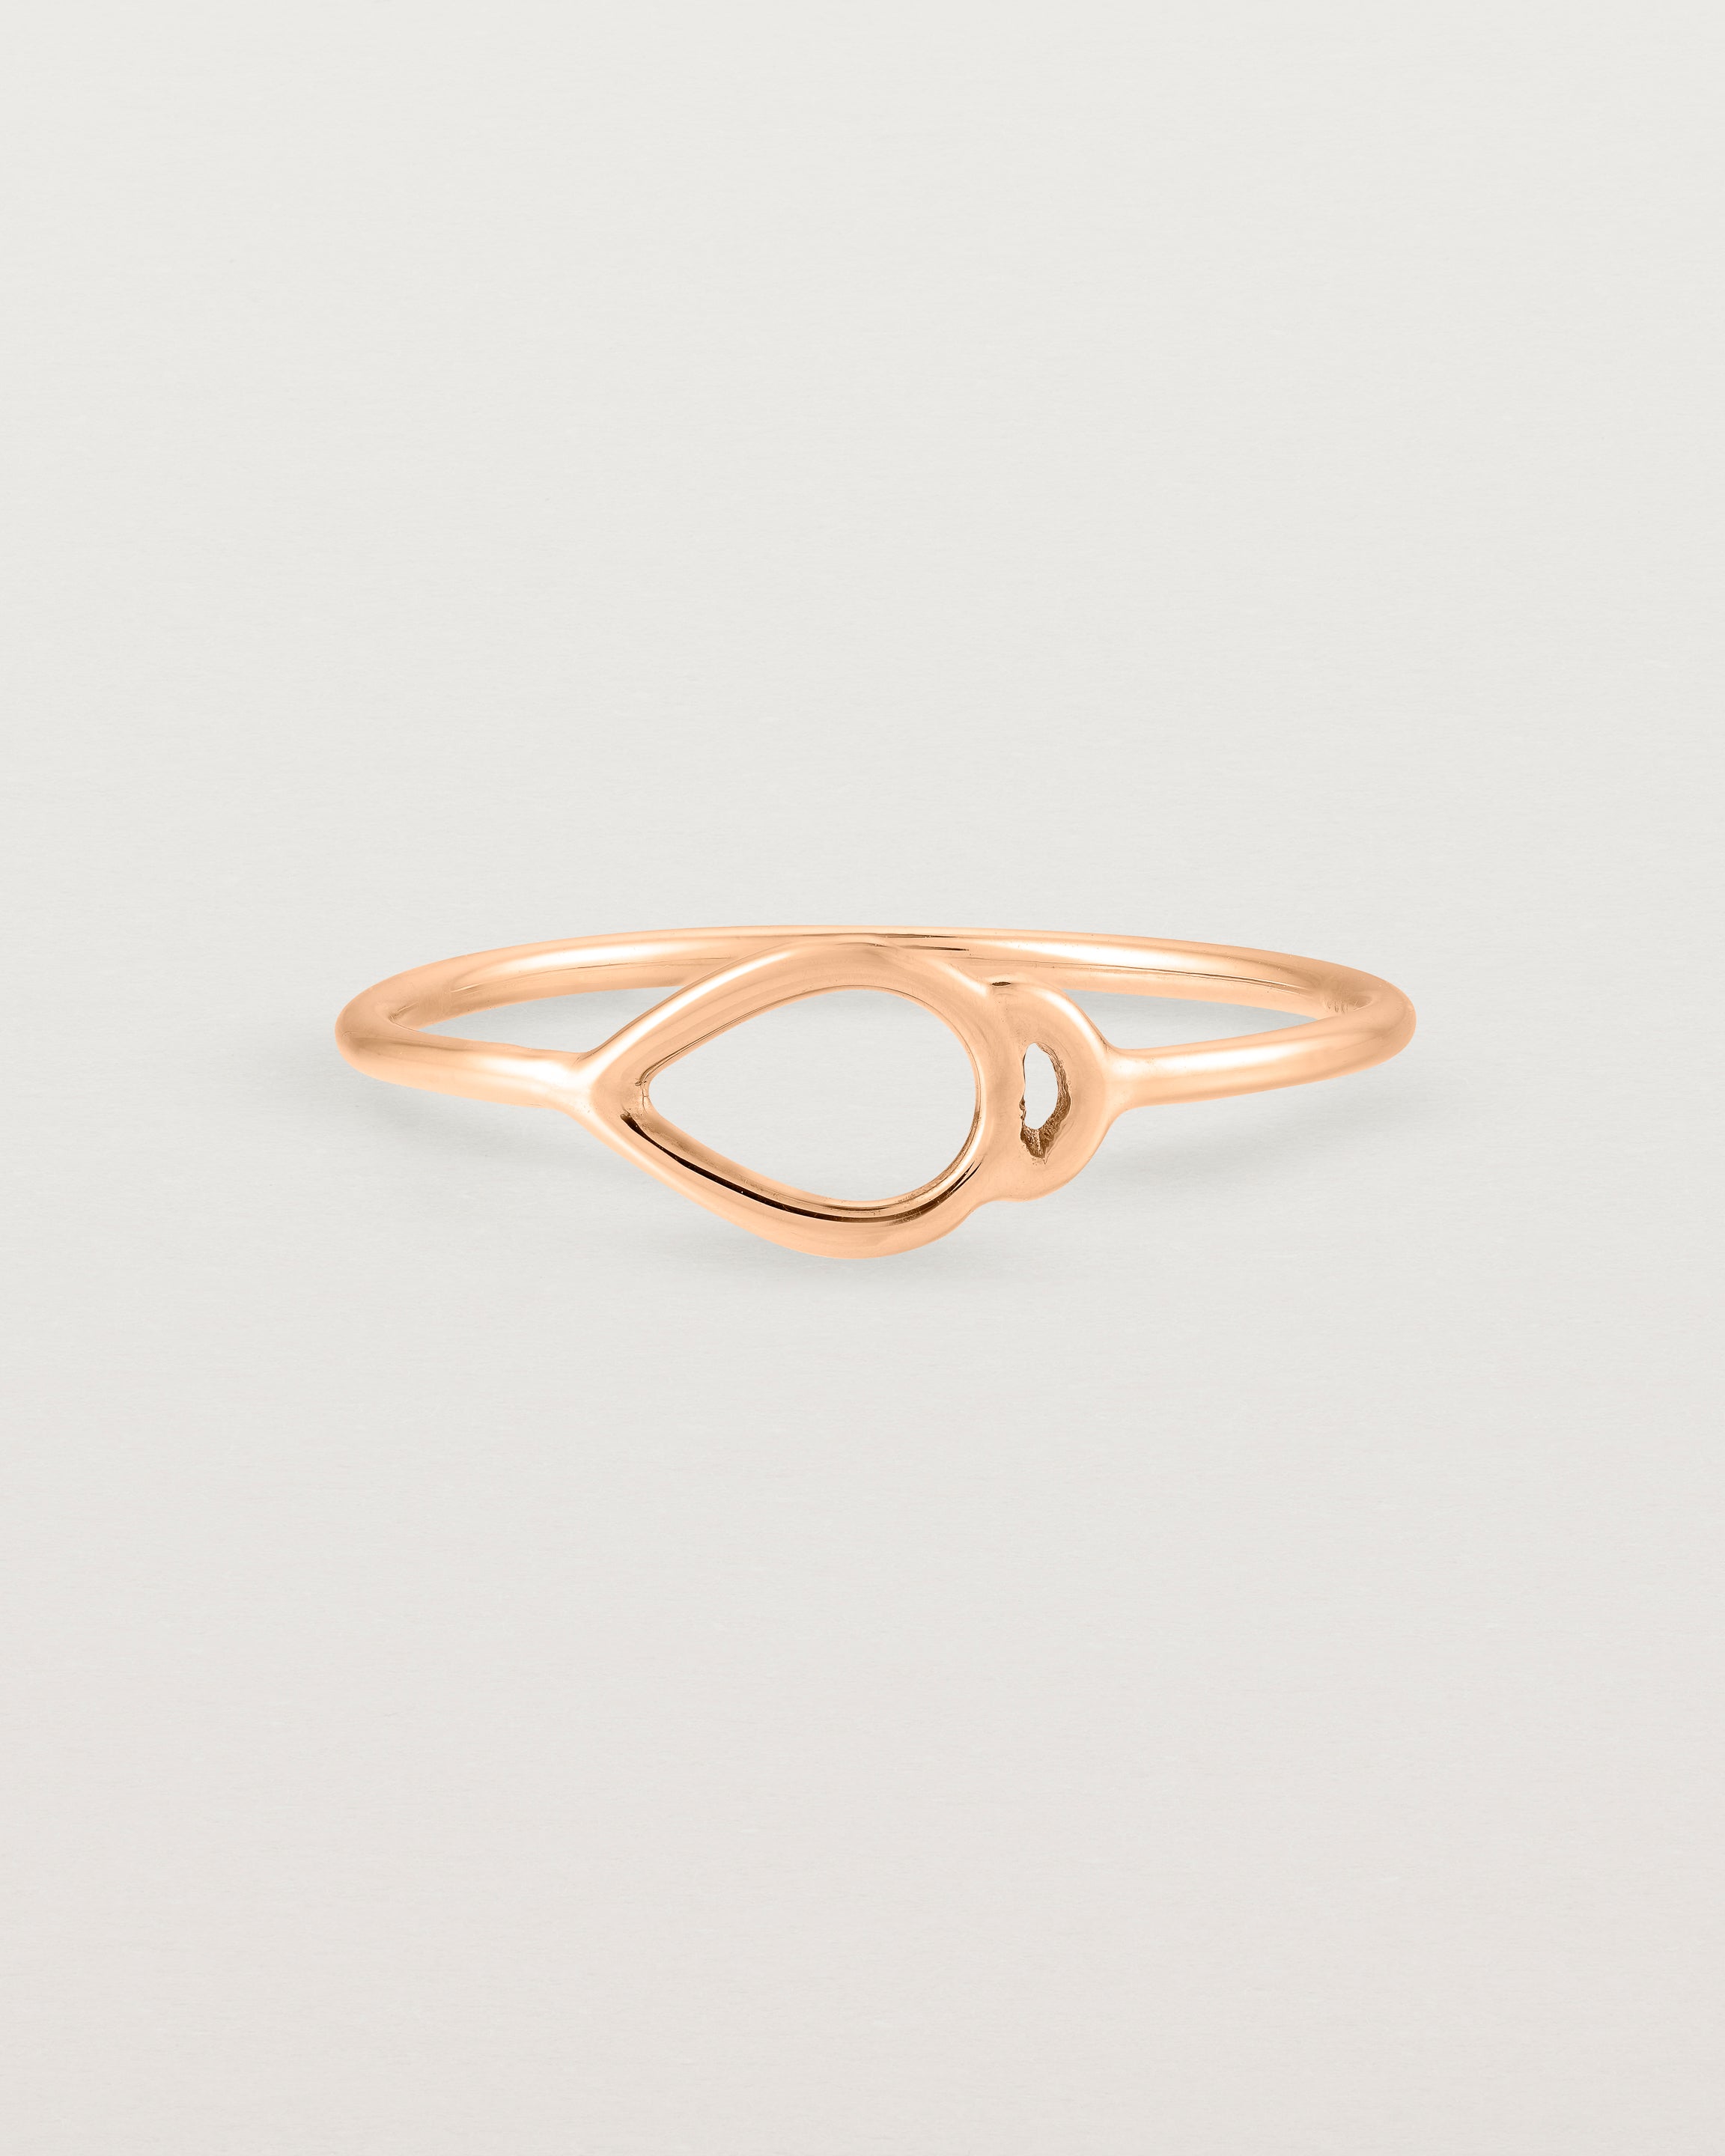 Front view of the Oana Ring in Rose Gold.